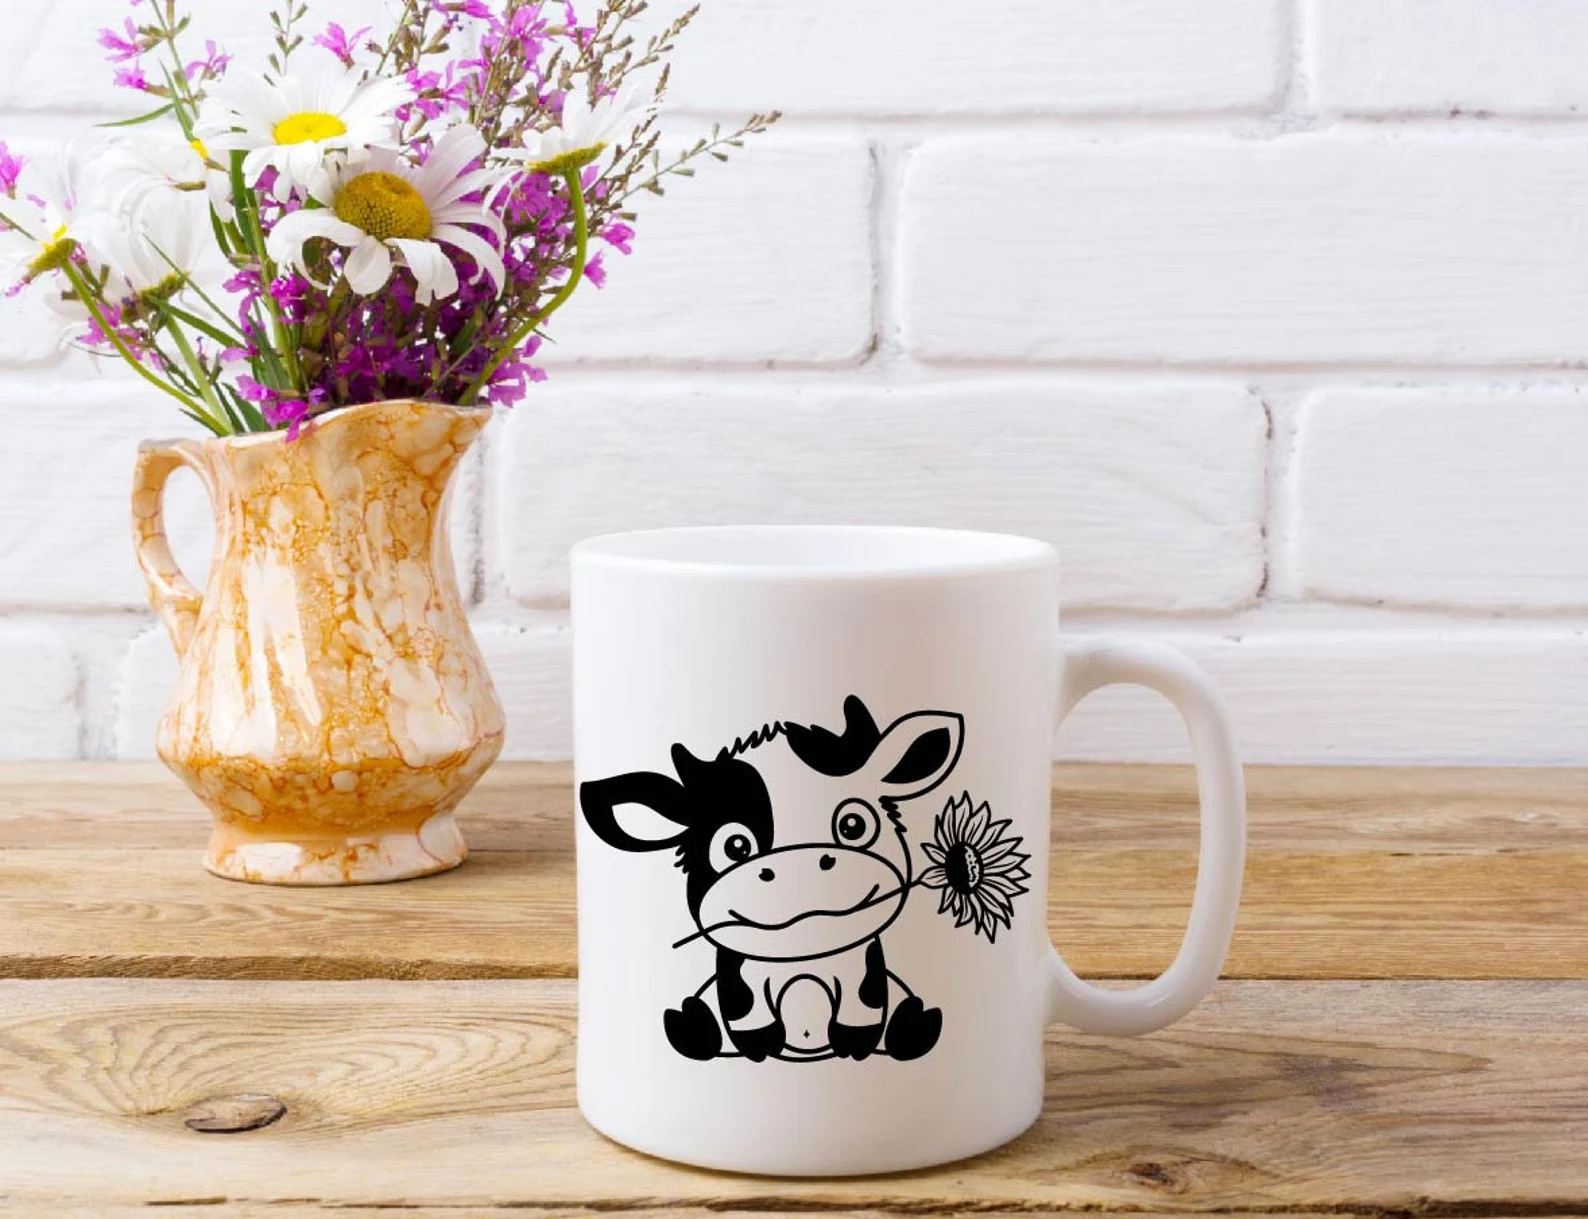 Cow mug sitting next to a vase of flowers.